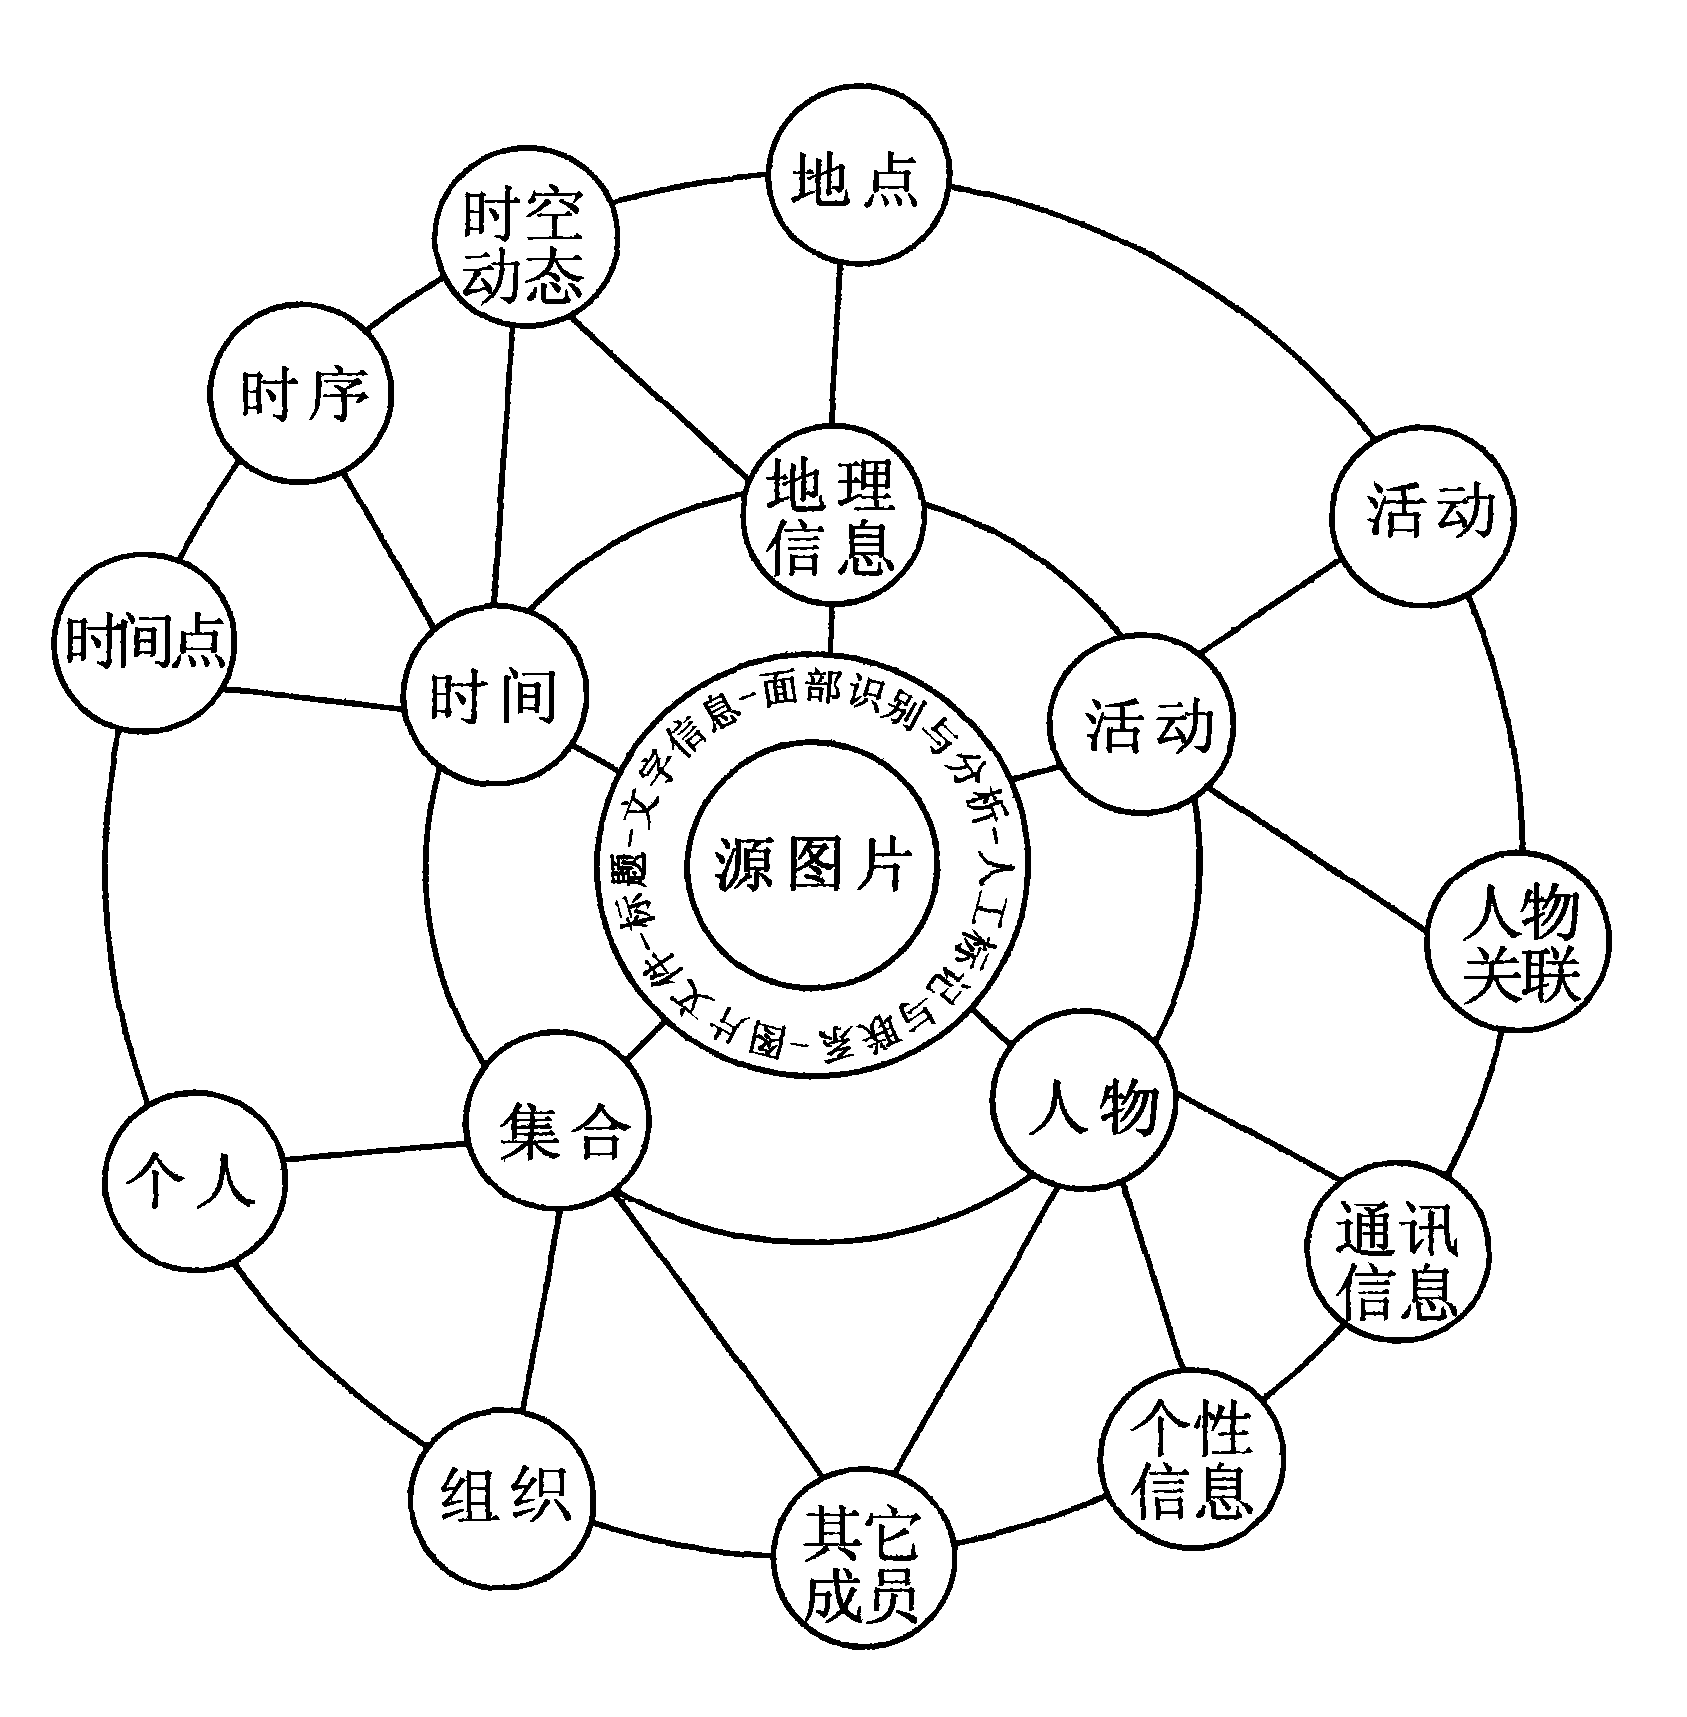 Individual-photo-based human network correlation analysis and management system and method